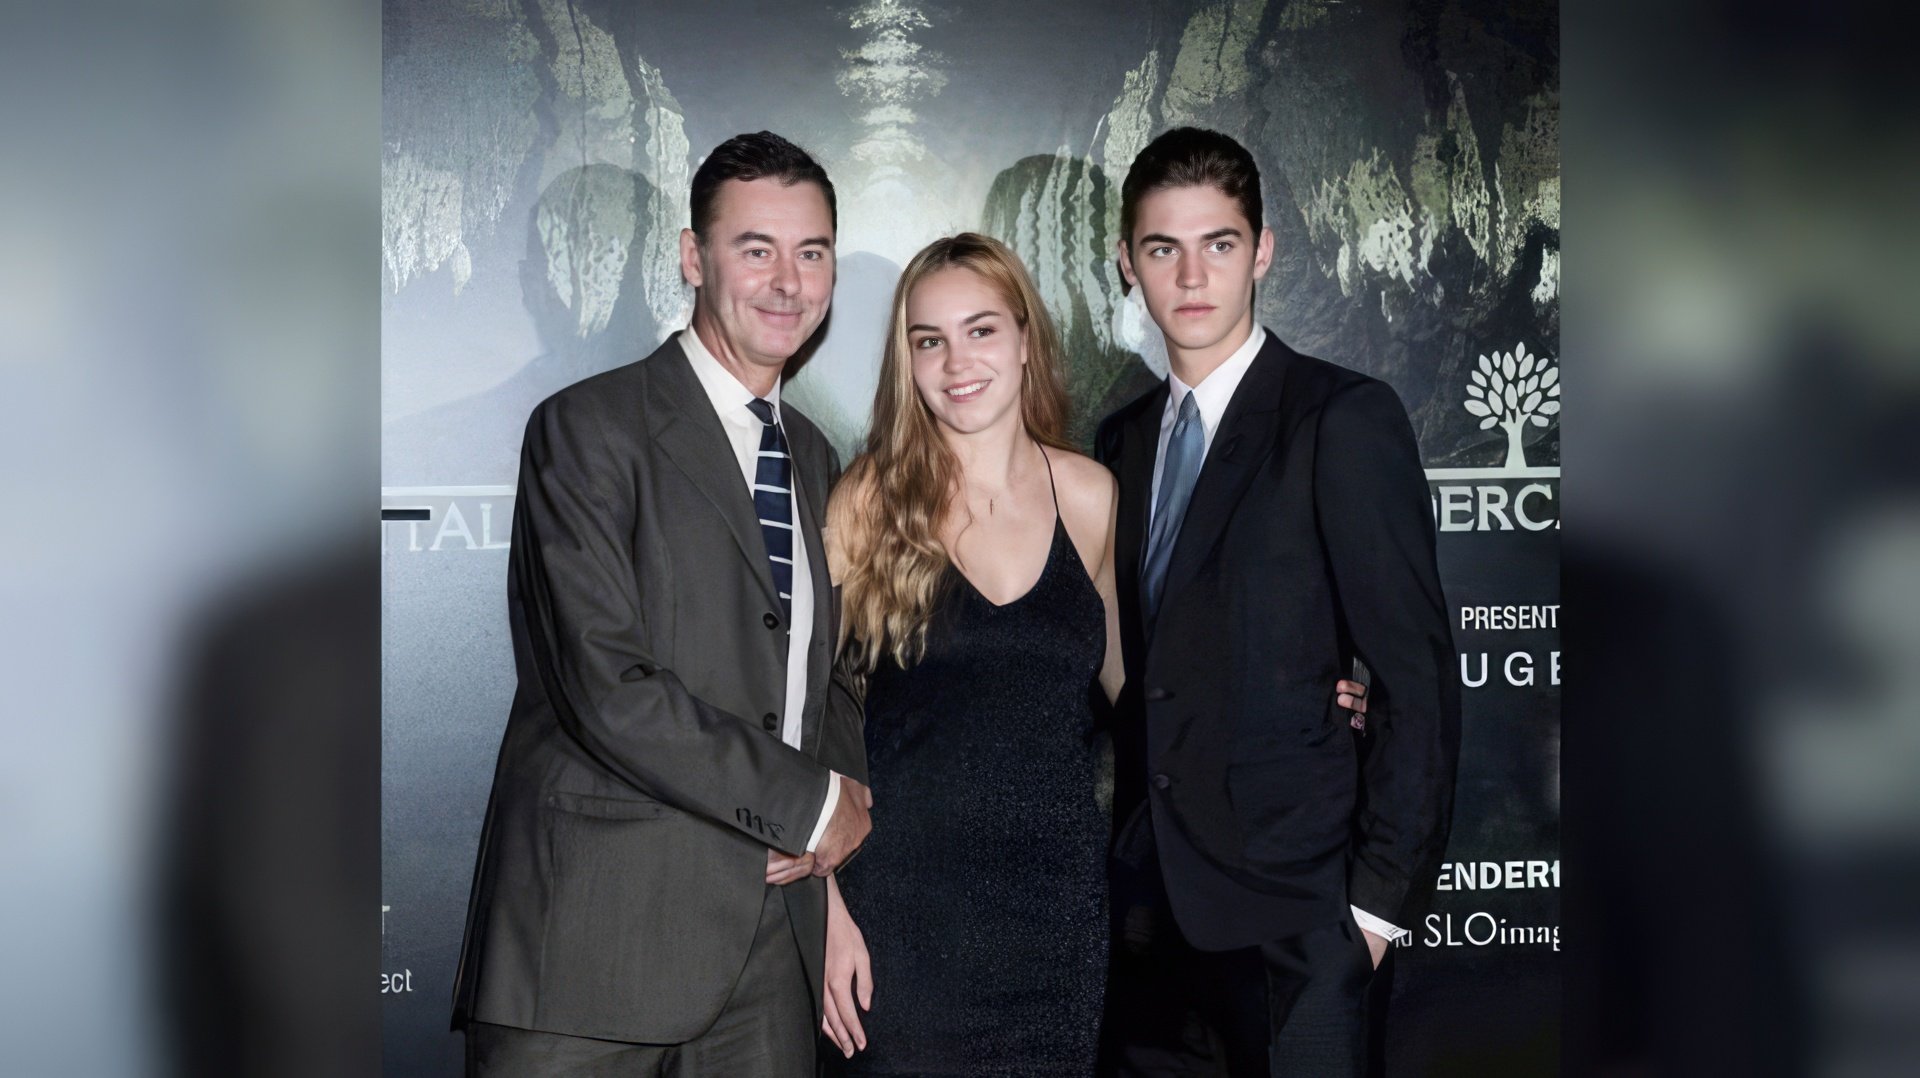 Hero Fiennes Tiffin with his father and sister Mercy